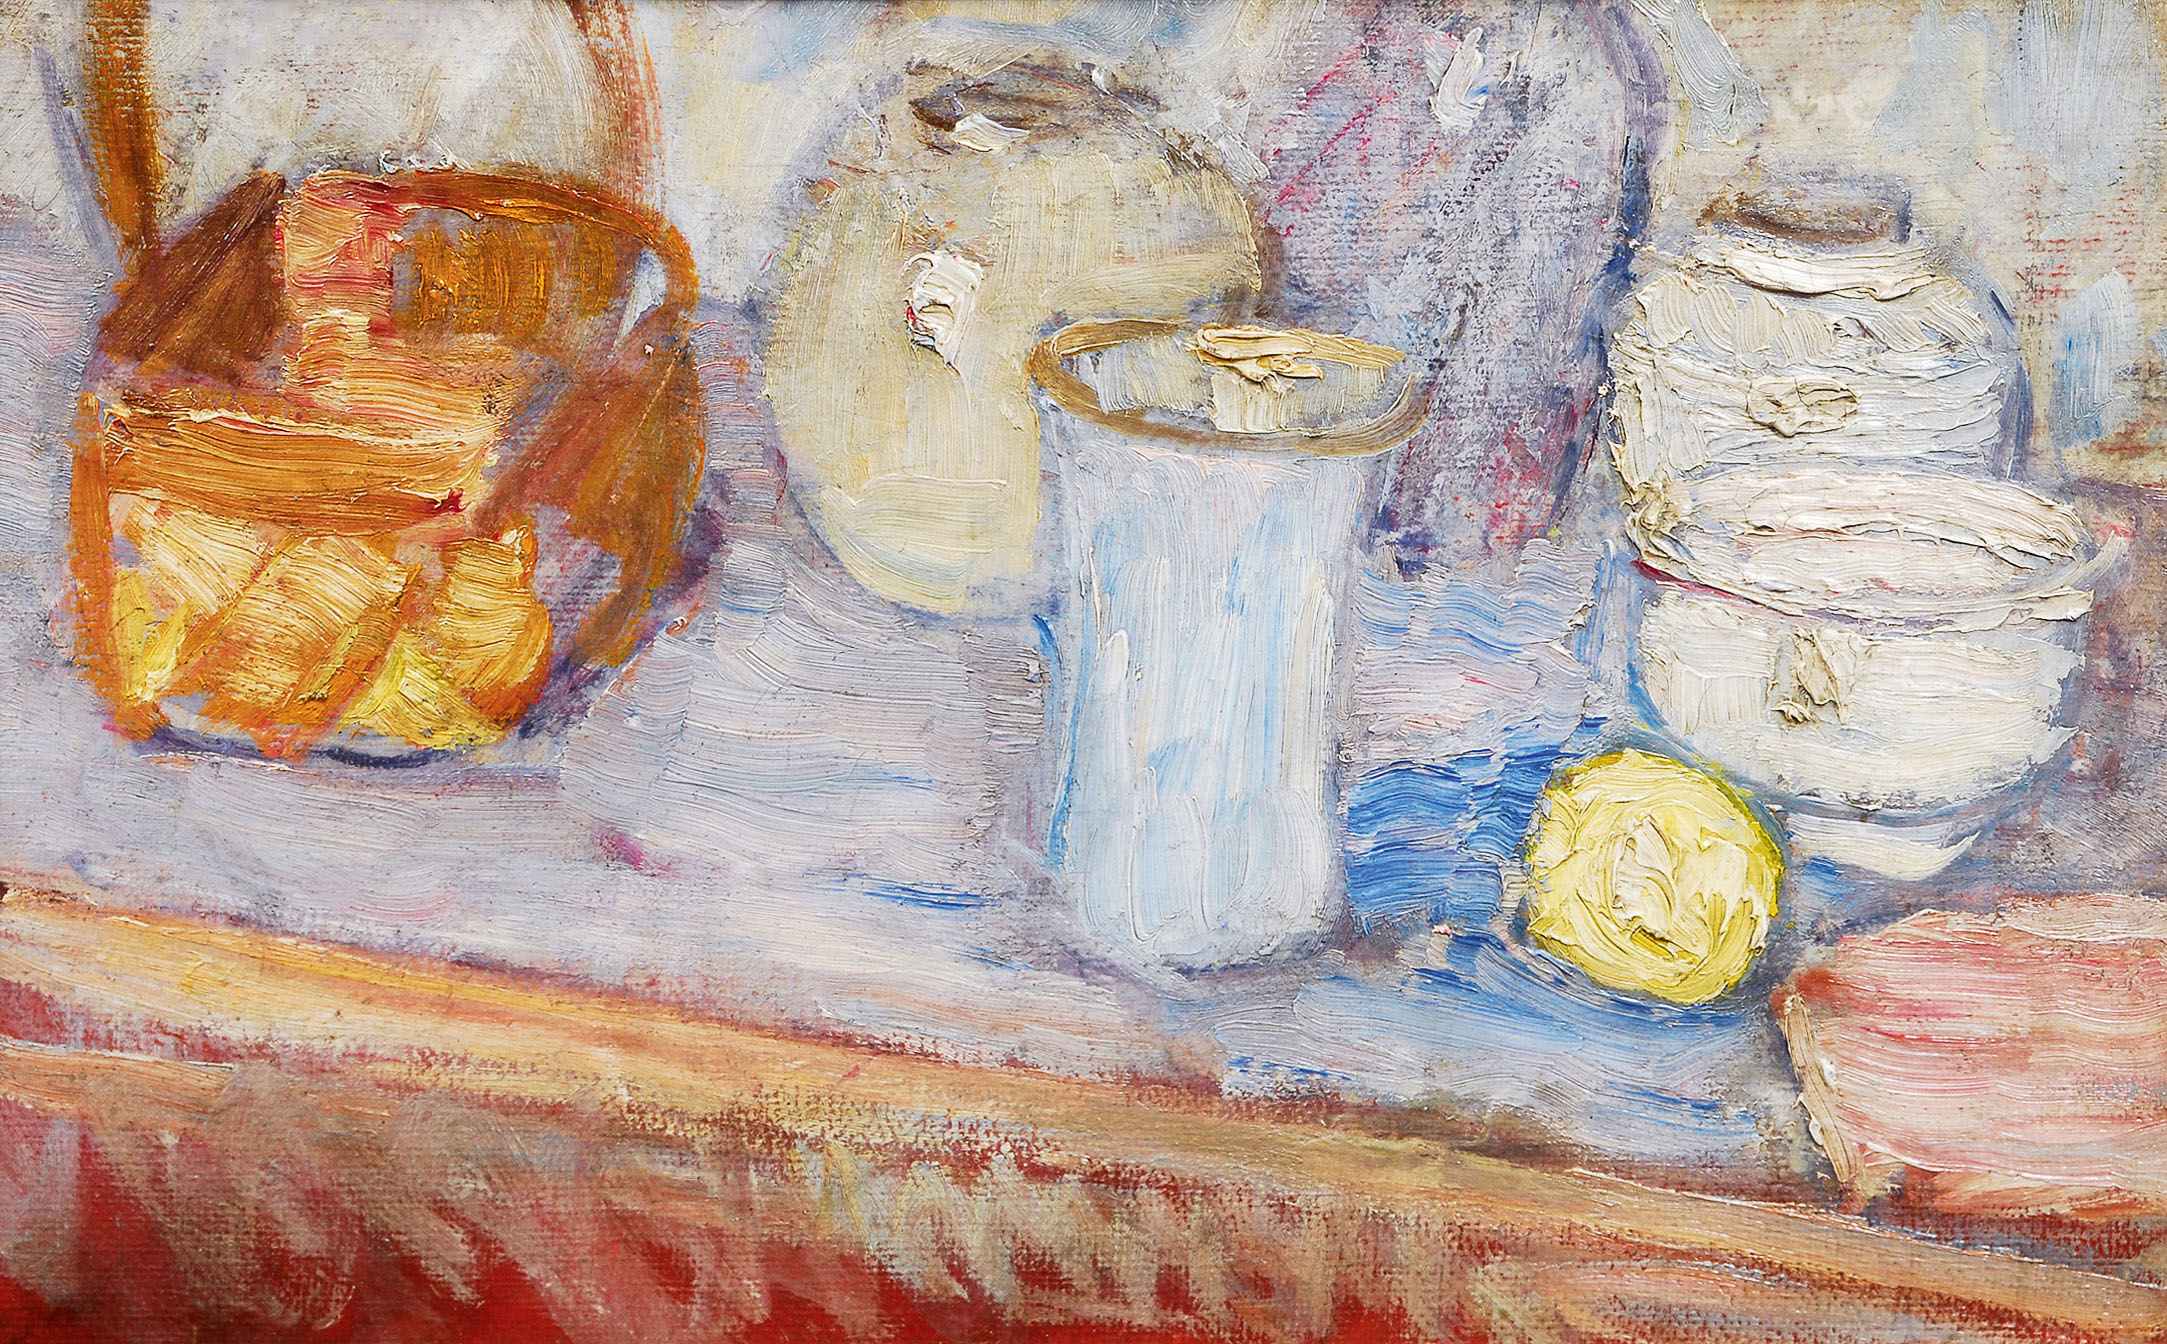 Still life with a basket and some vessels